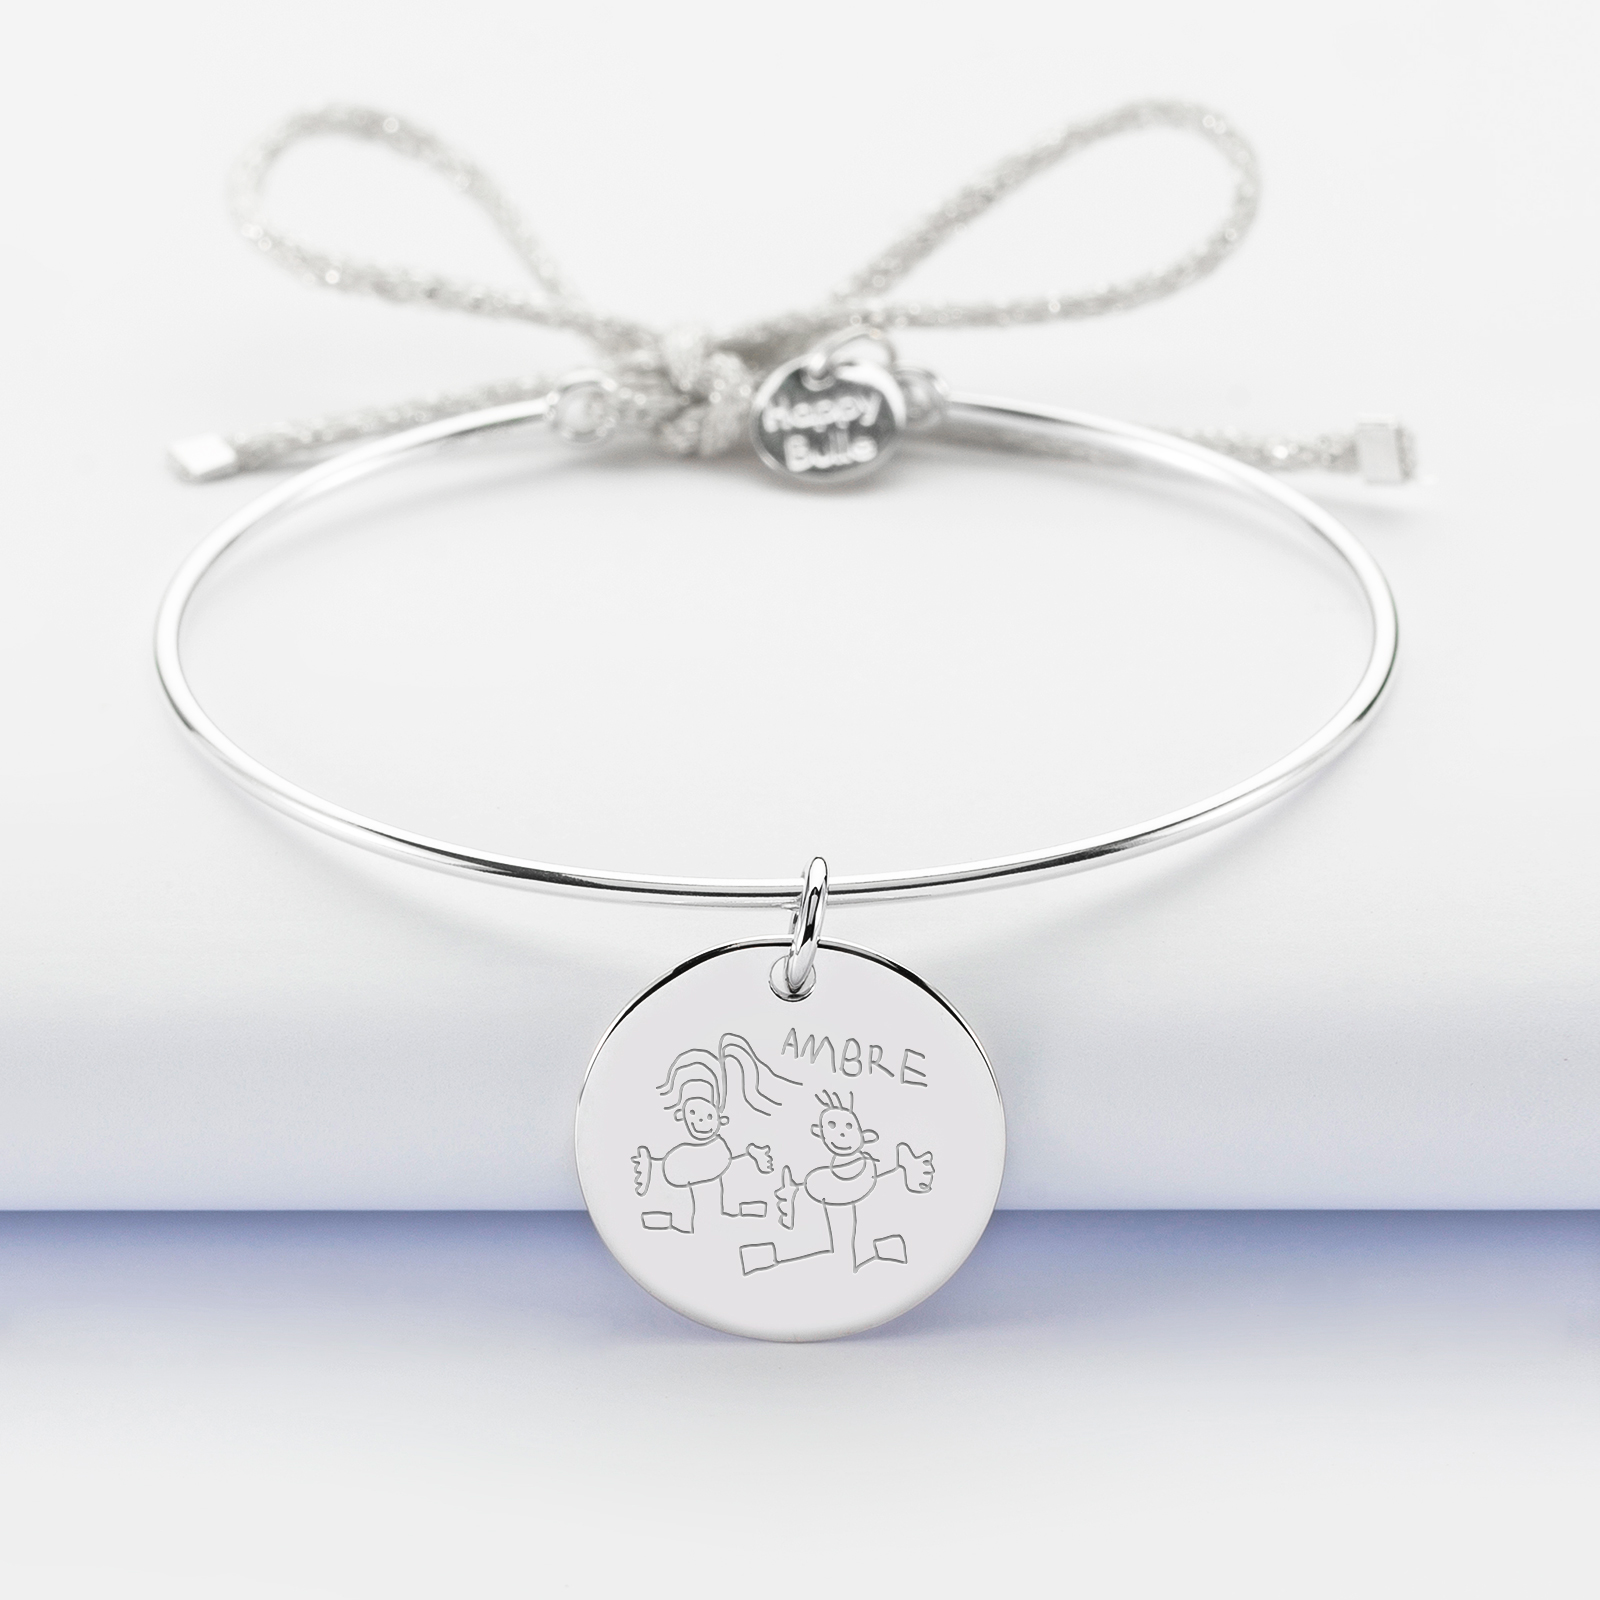 Personalised silver and sparkly cord bangle bracelet and 19 mm engraved medallion - sketch